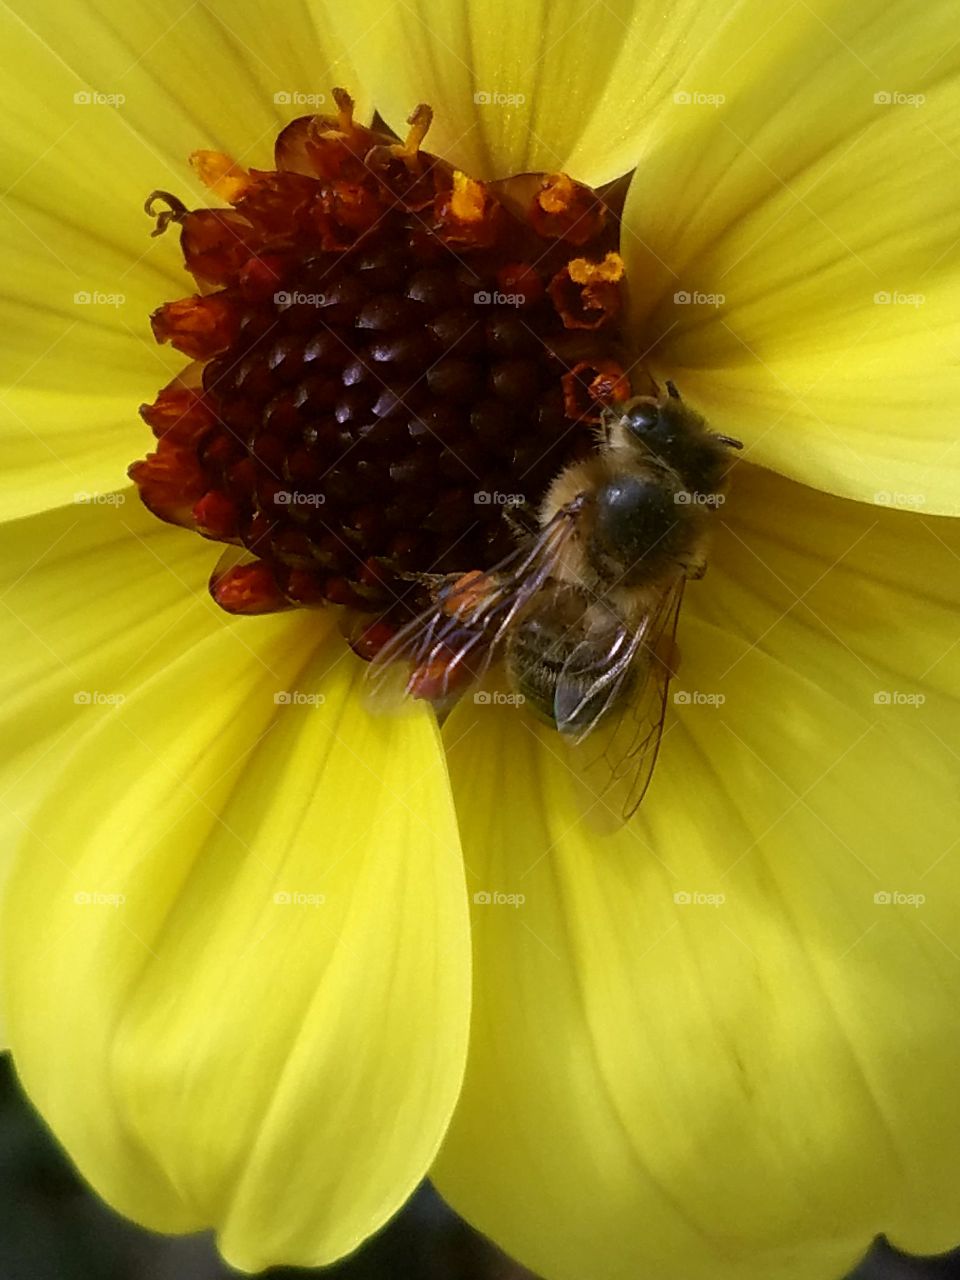 A bee hard at work pollinating flowers before winter